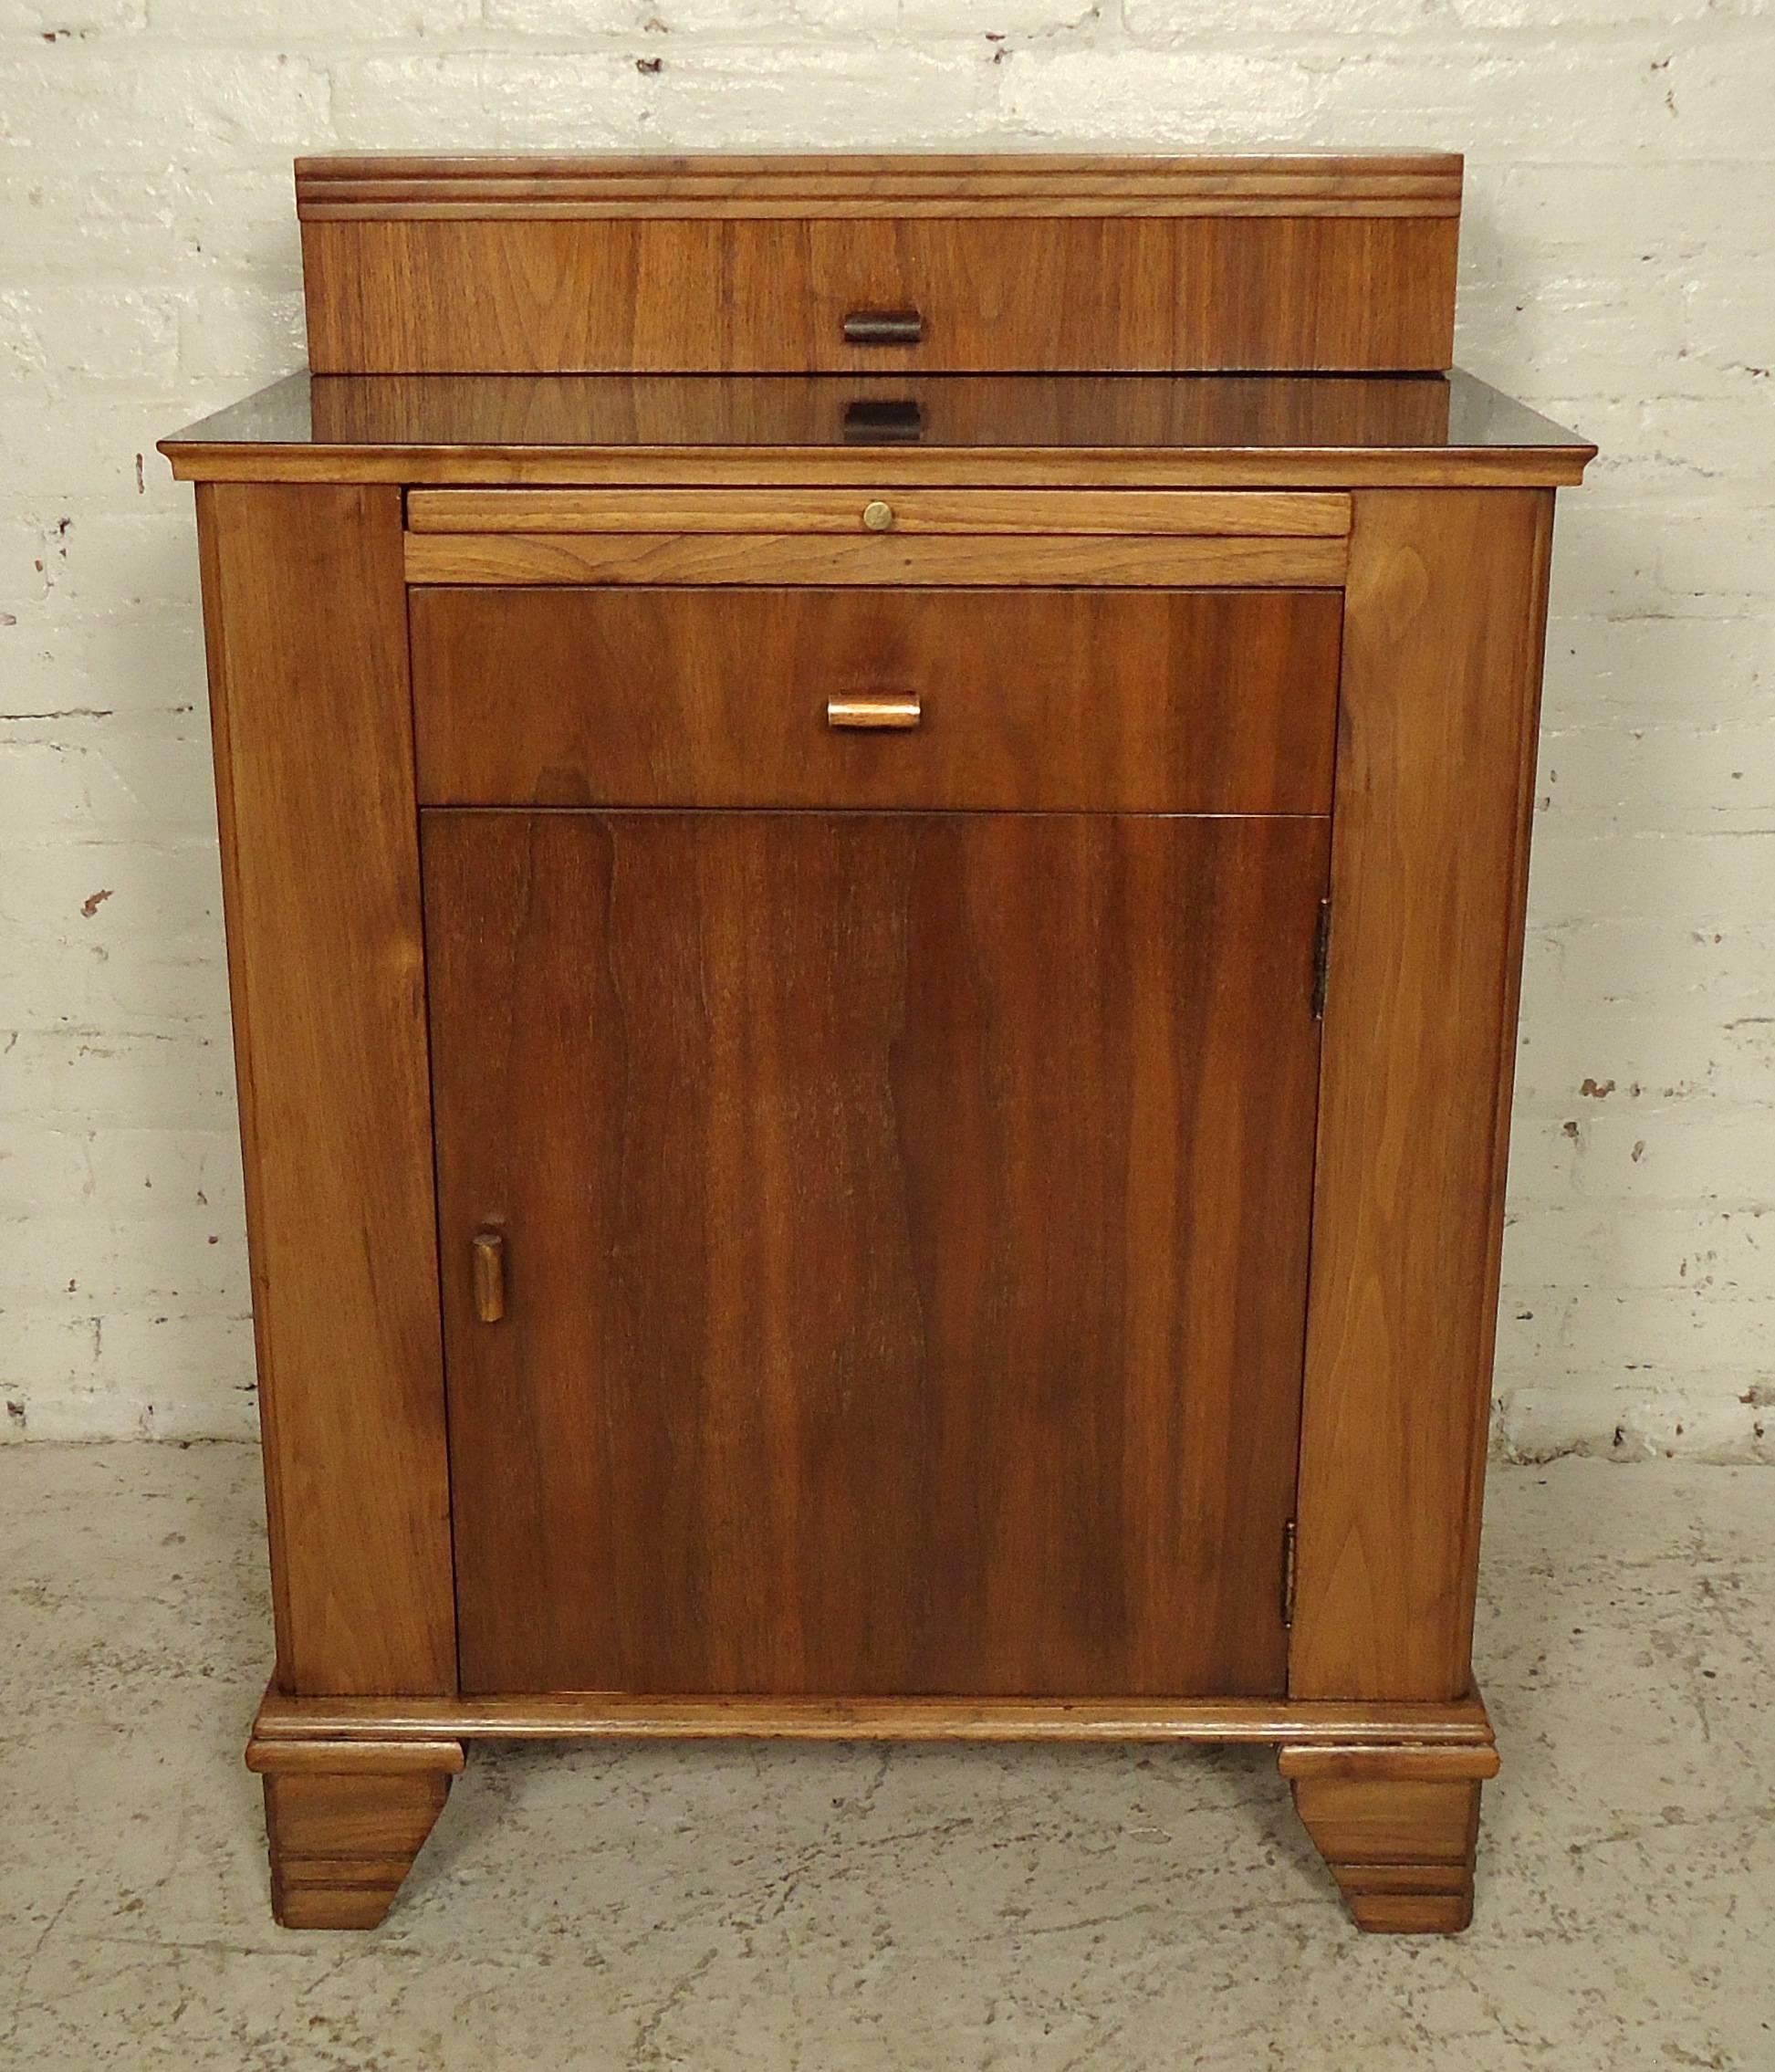 This unique vintage doctors cabinet features a mid-size storage unit, one pull-out shelf over one drawer, and a top compartment above a black Lucite top. This piece has been completely refinished, may contain a few dings along the body and top.